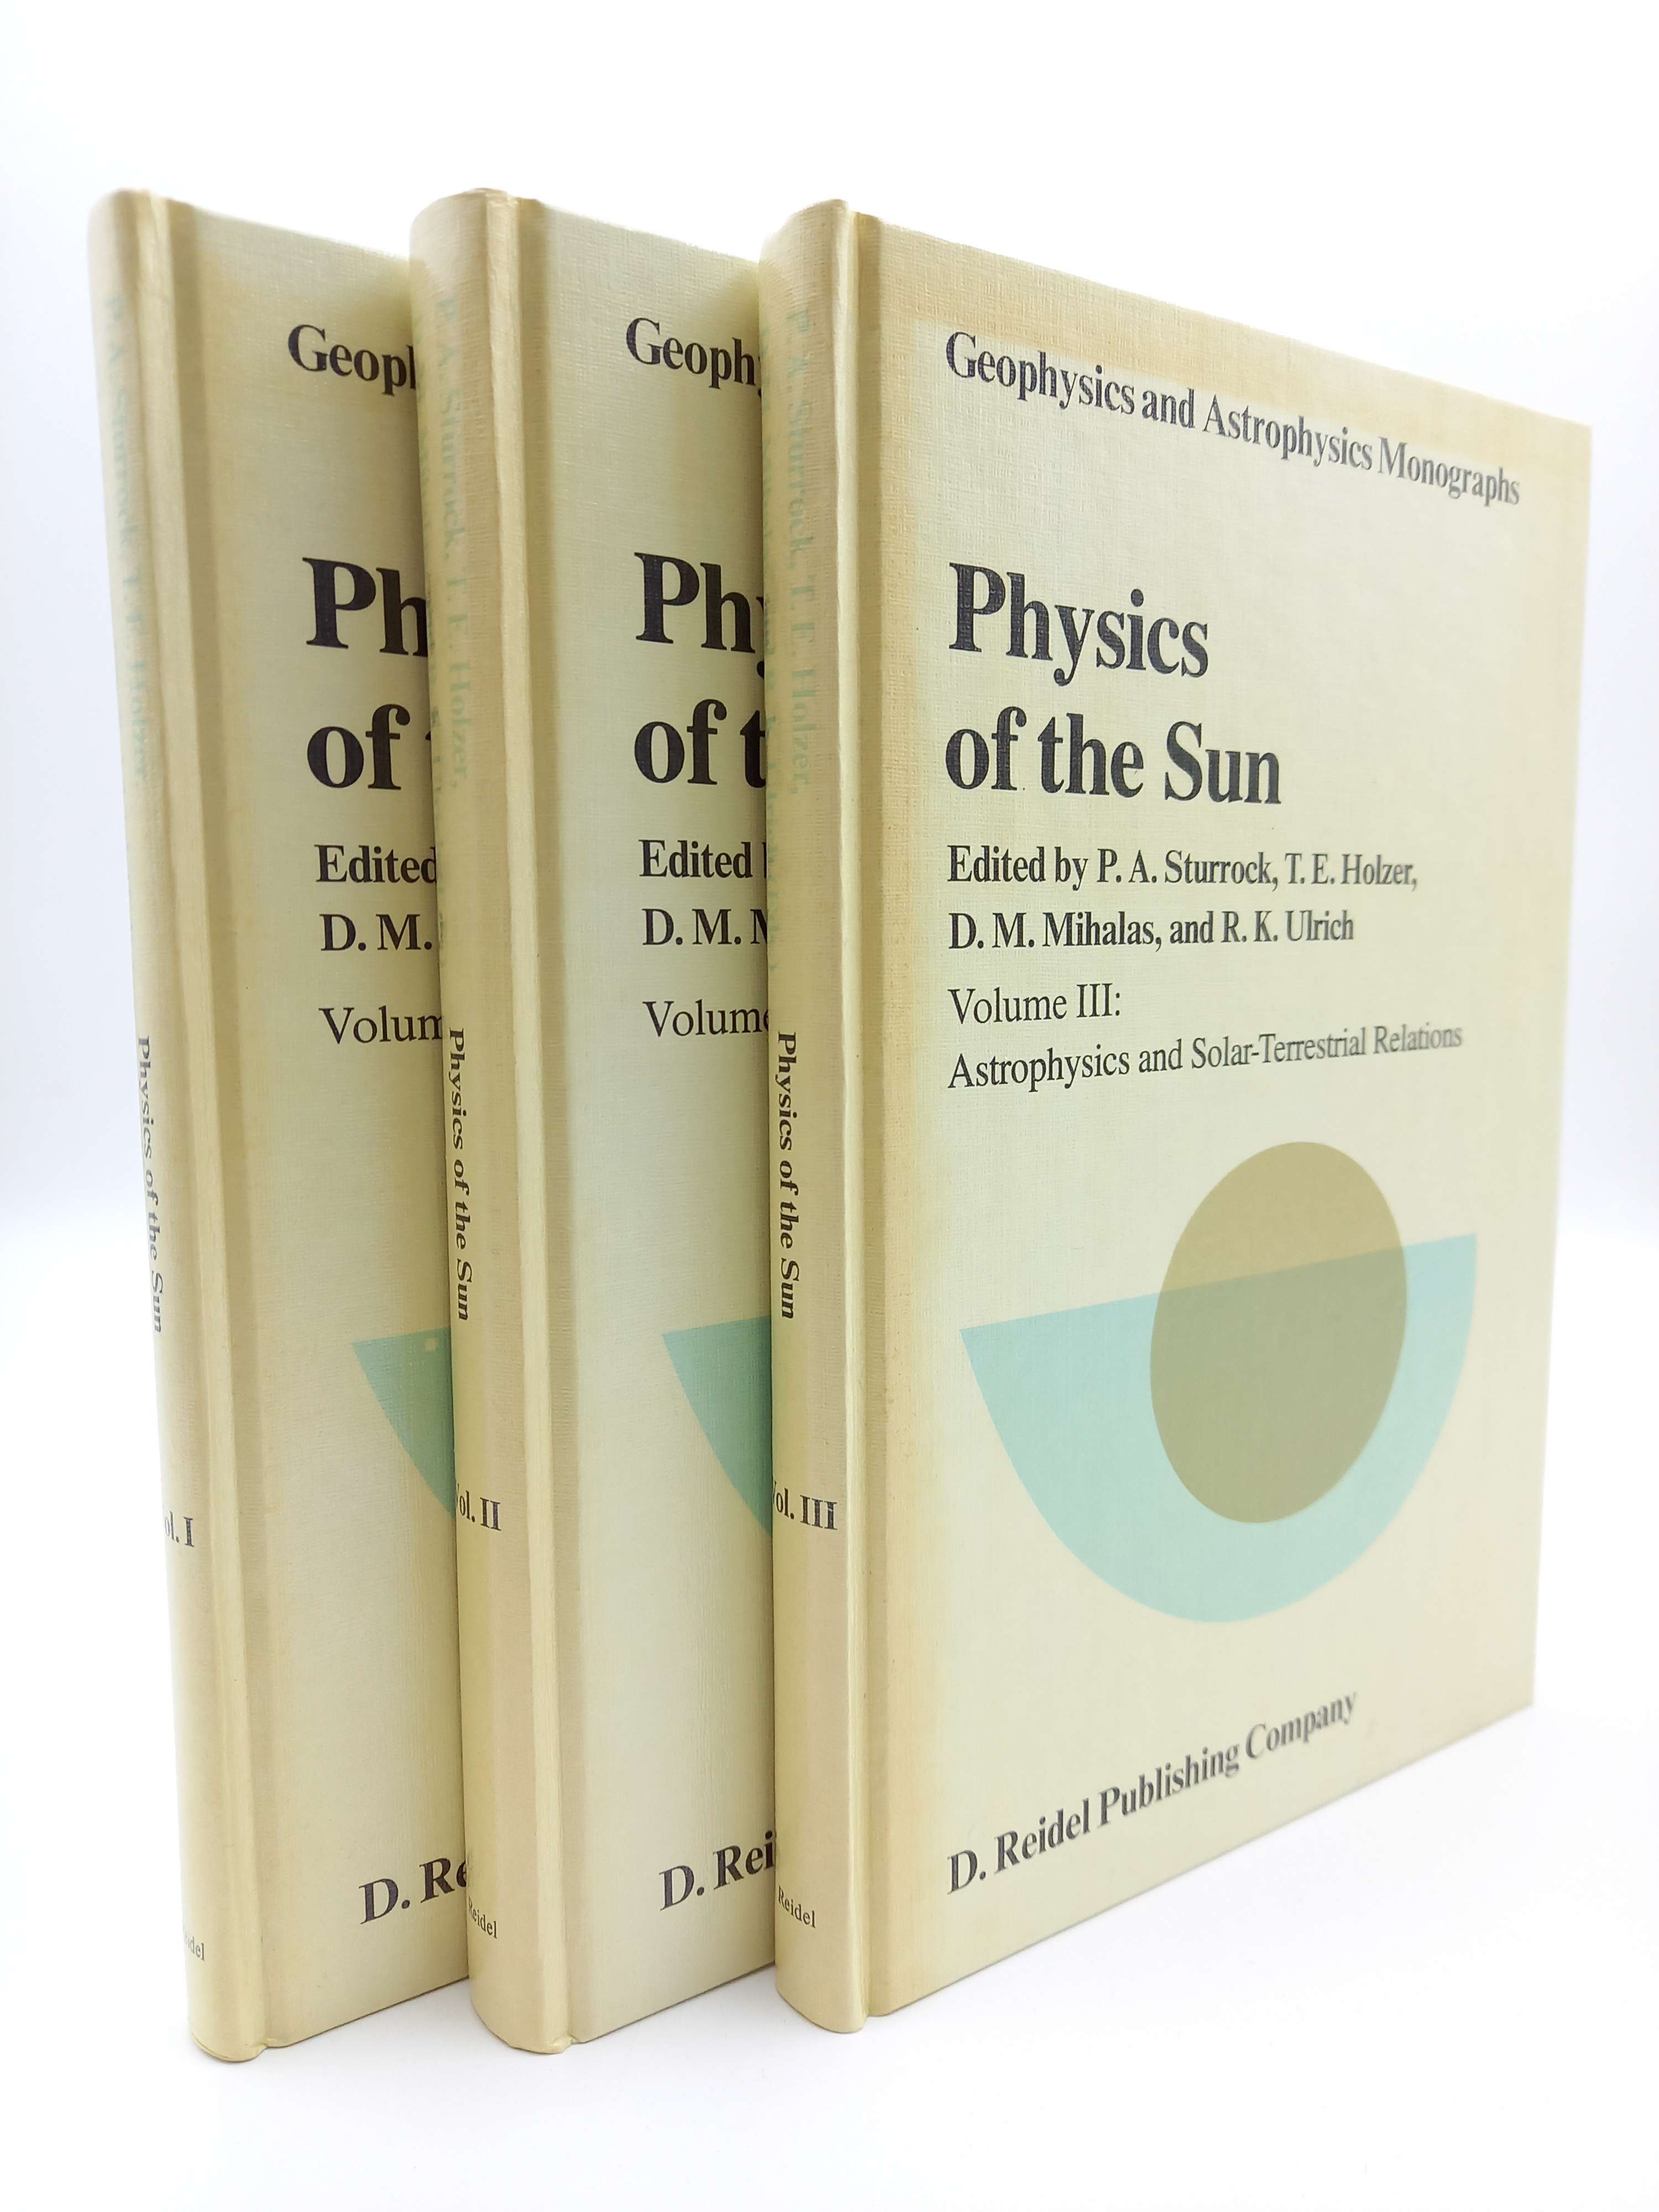 Physics of the Sun (3 Bände). Vol. 1:The Solar Interior / Vol. 2: The Solar Atmosphere / Vol. 3: Astrophysics and Solar-Terrestrial Relations - Sturrock, Peter A.; T.E. Holzer; D.M. Mihalas; R.K. Ulrich [Hrsg.]